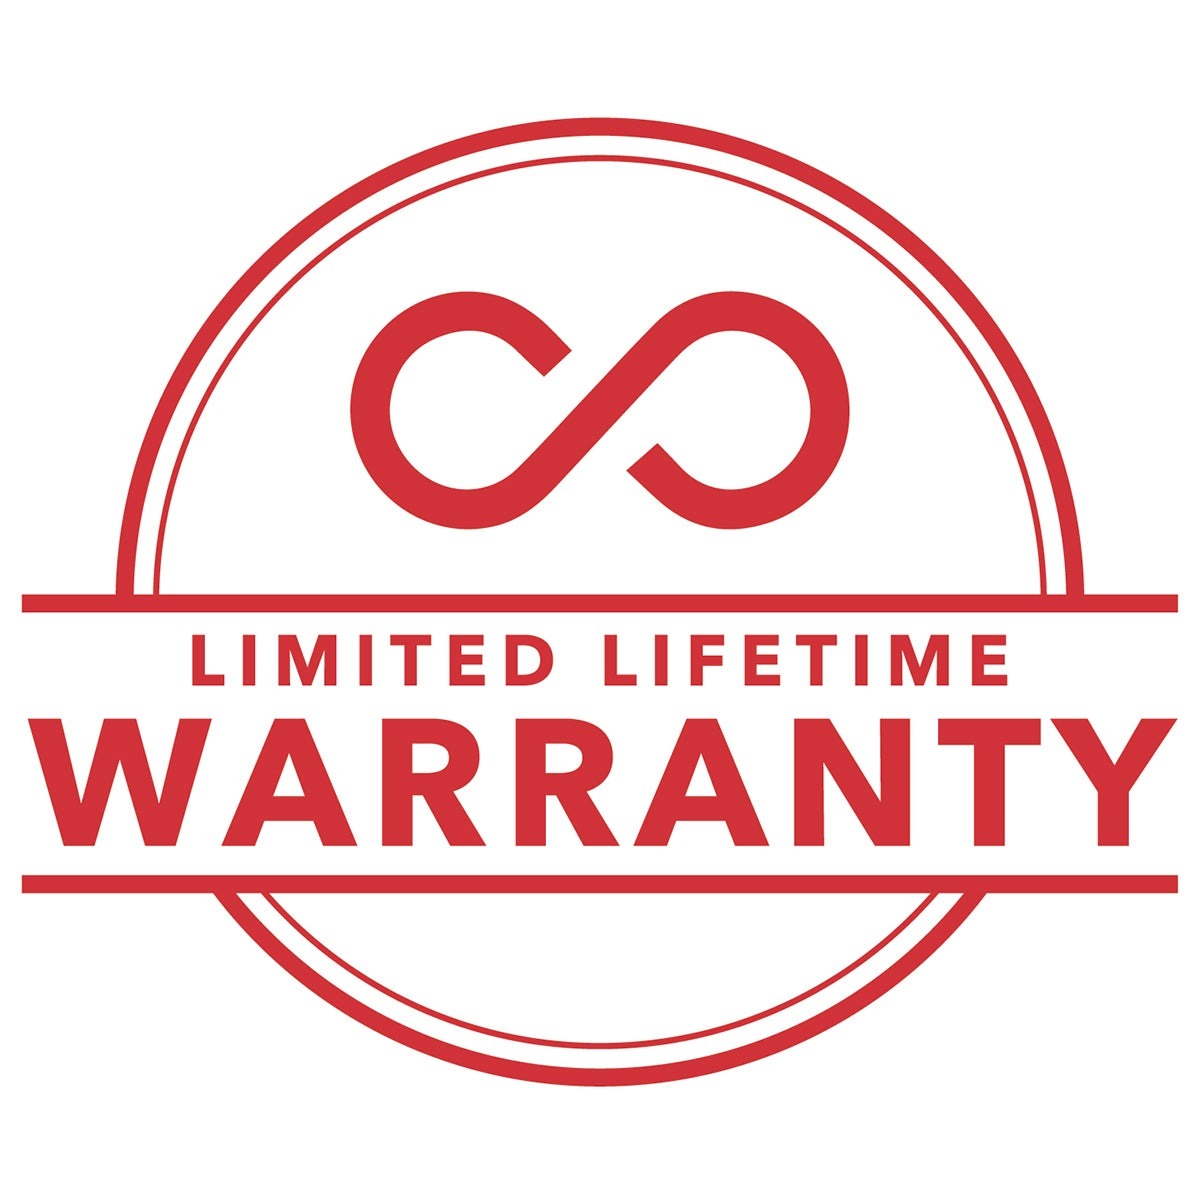 Limited Lifetime Warranty
||If your case ever gets worn or damaged, we will replace it for as long as you own your device (Shipping & Handling Applies)